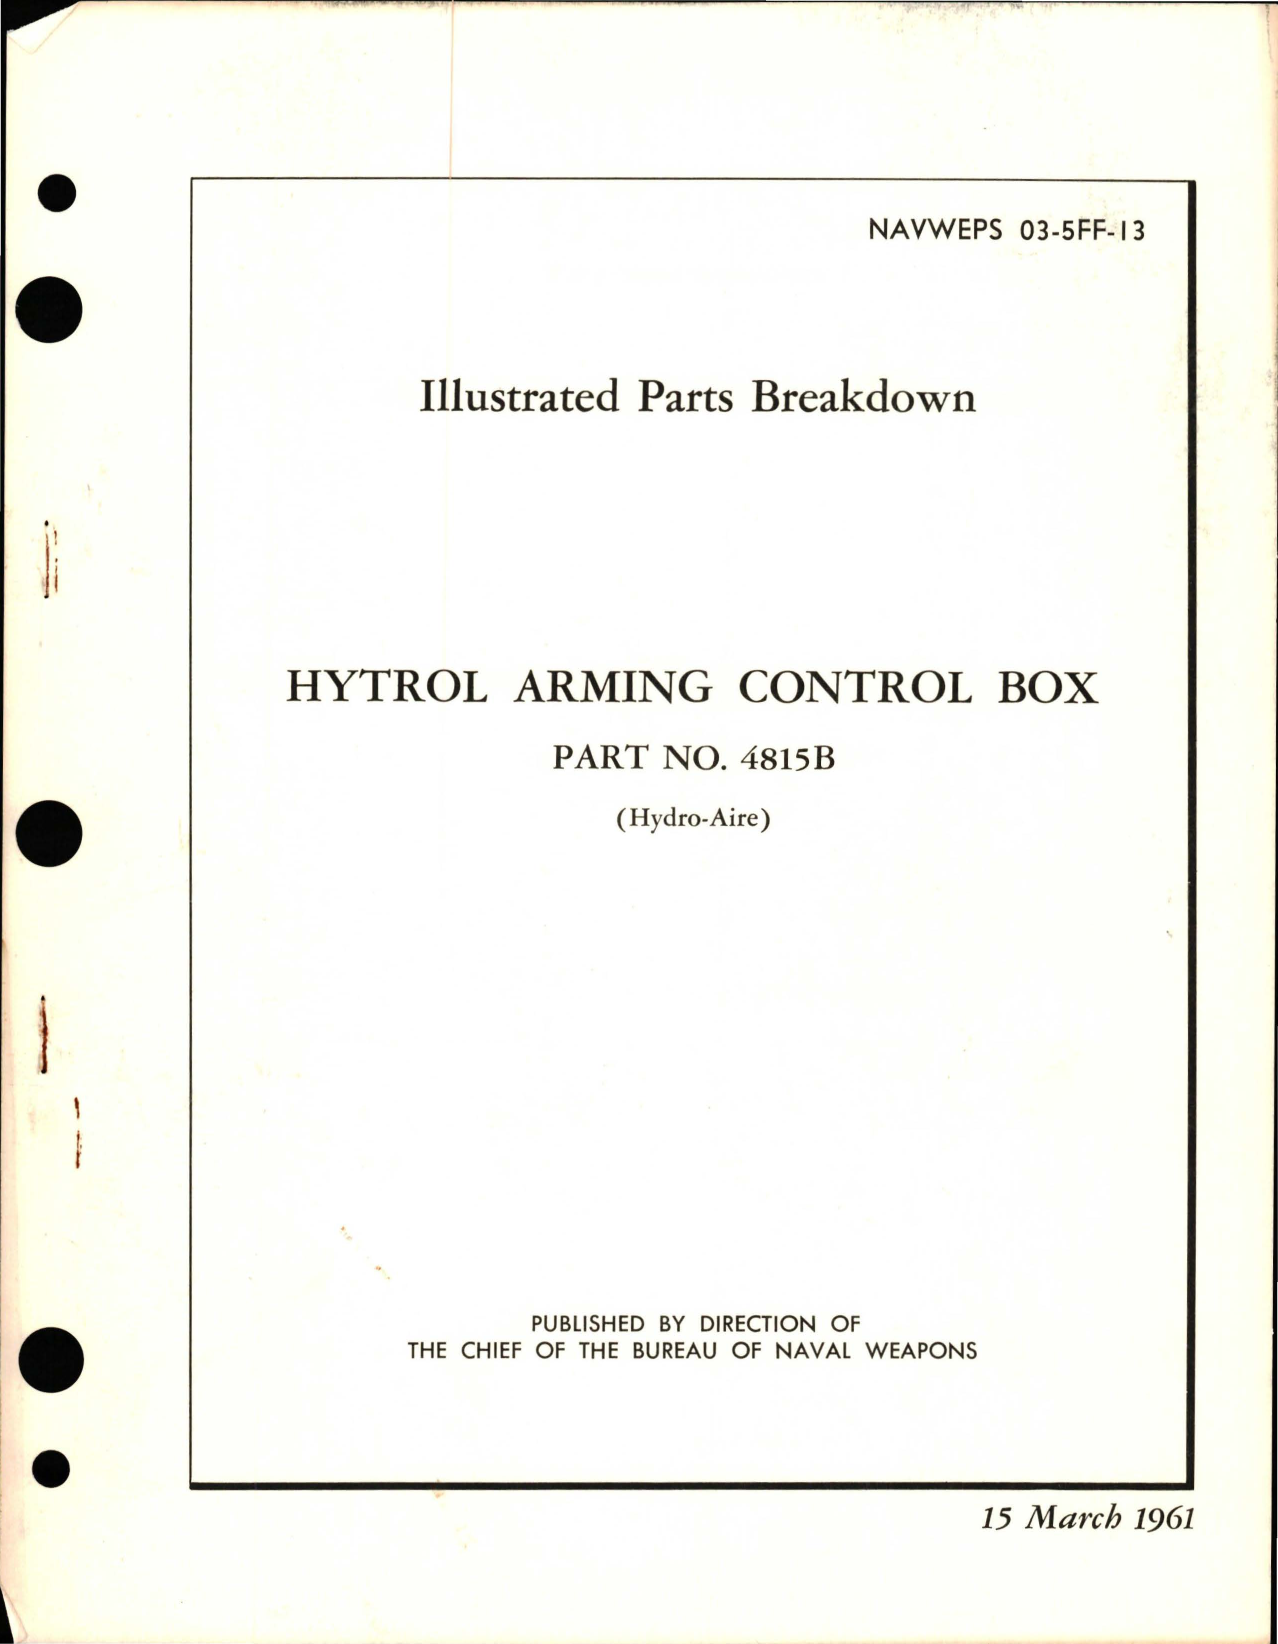 Sample page 1 from AirCorps Library document: Illustrated Parts Breakdown for Hytrol Arming Control Box - Part 4815B